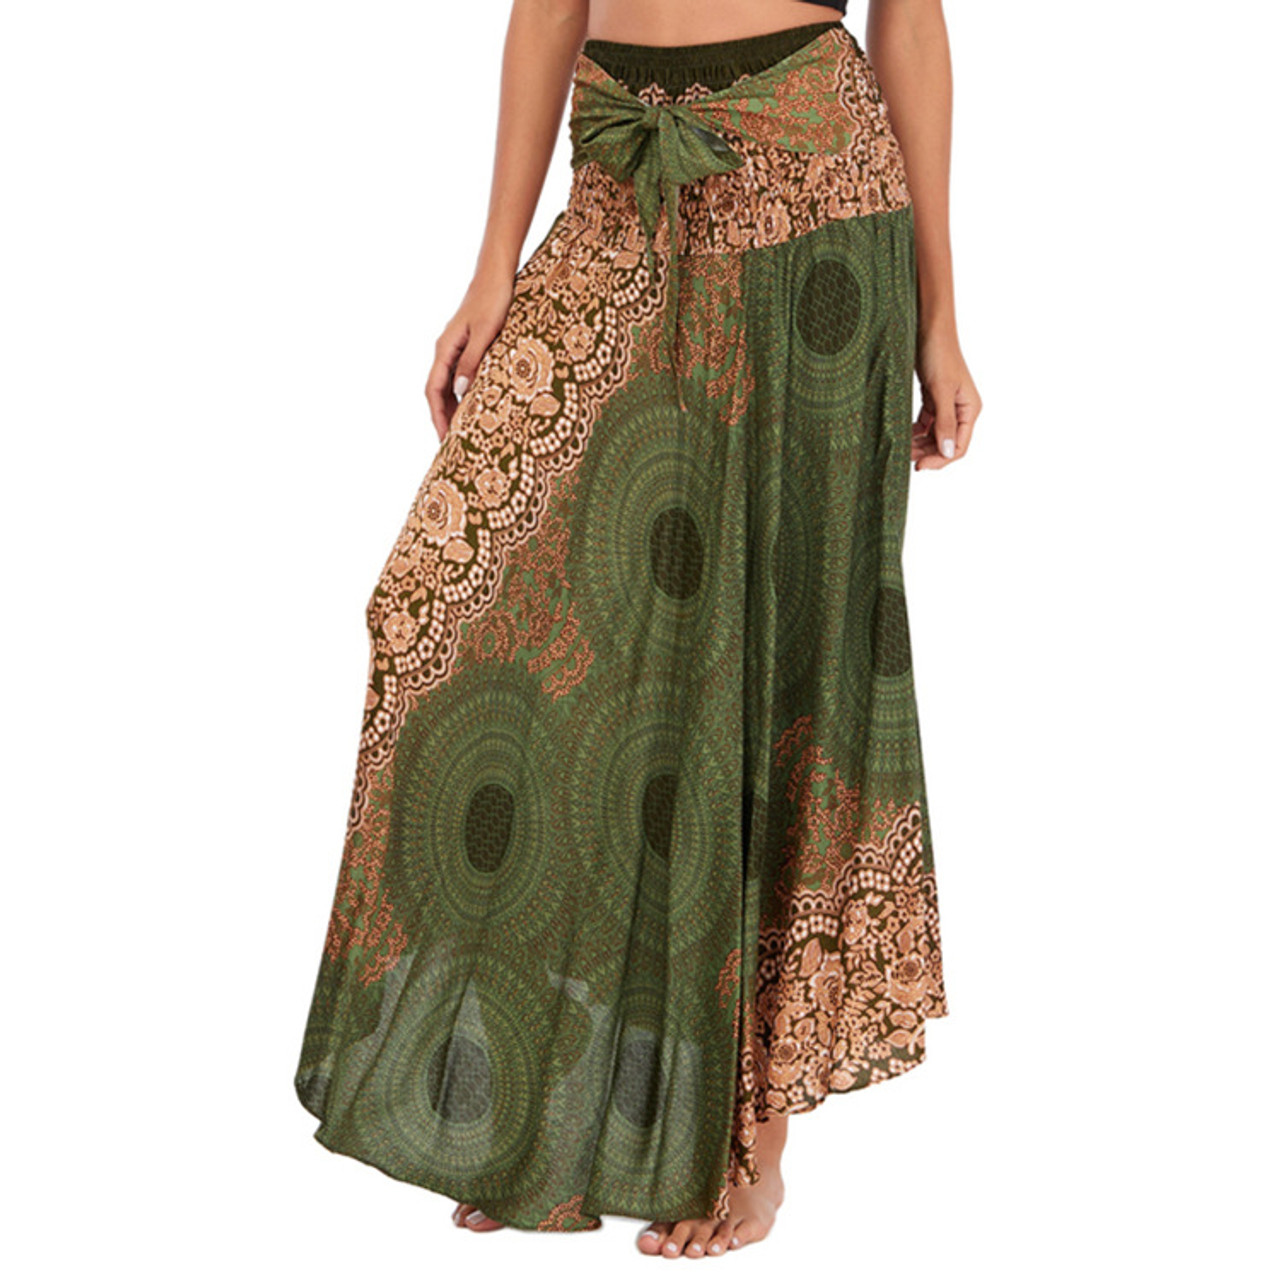 Casual Bohemian Print Beach Holidays Swing Skirt - The Little Connection